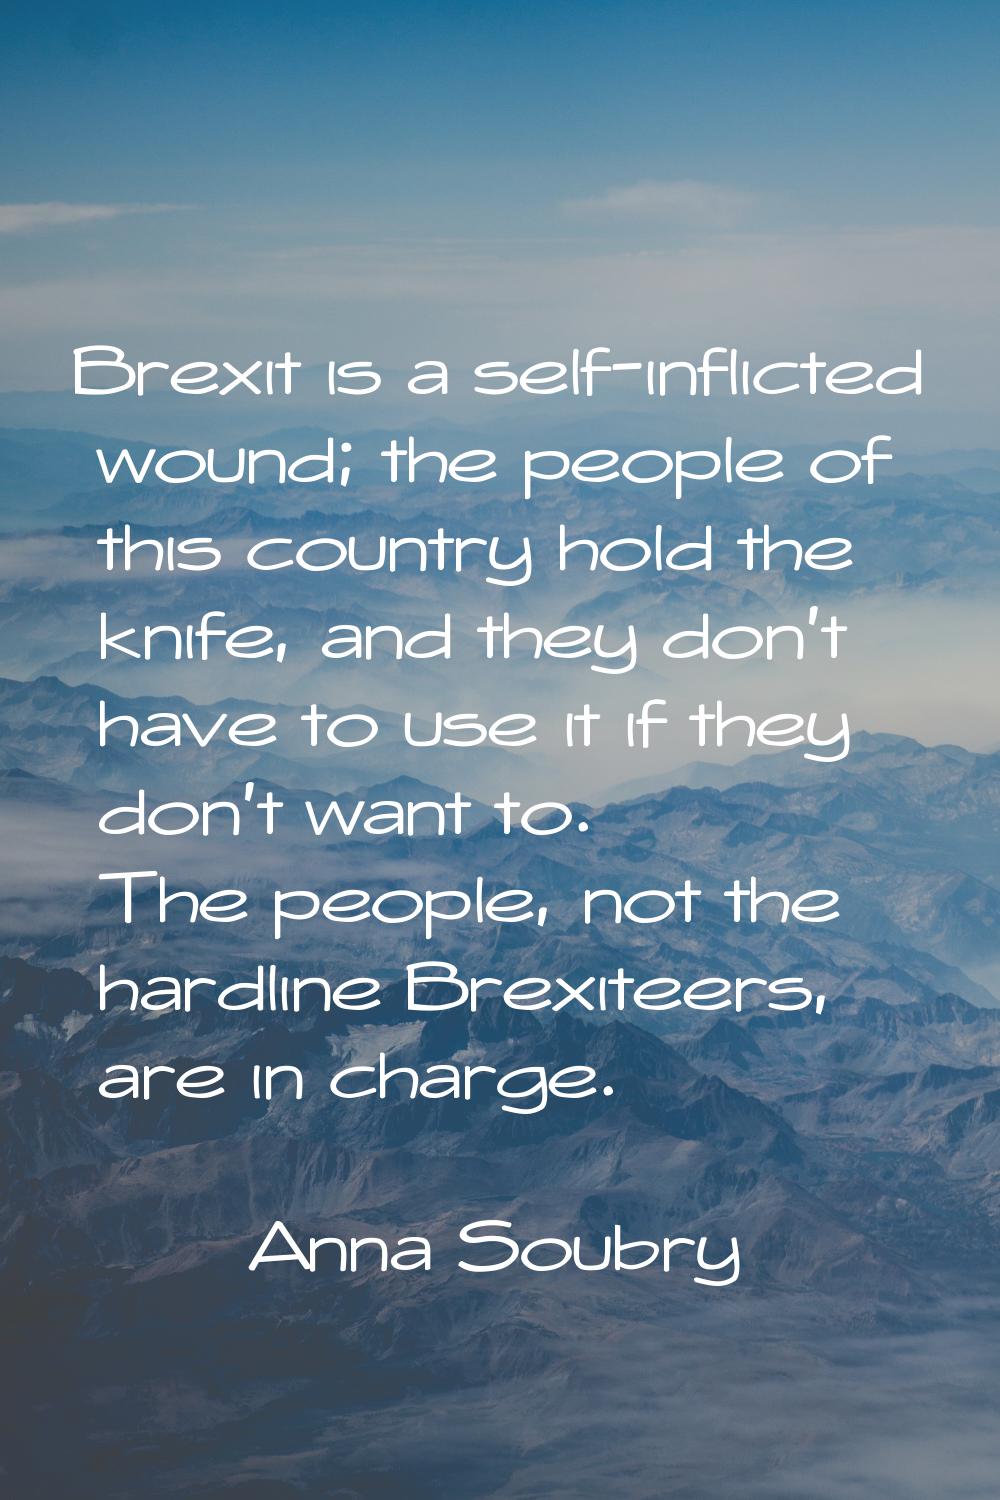 Brexit is a self-inflicted wound; the people of this country hold the knife, and they don't have to